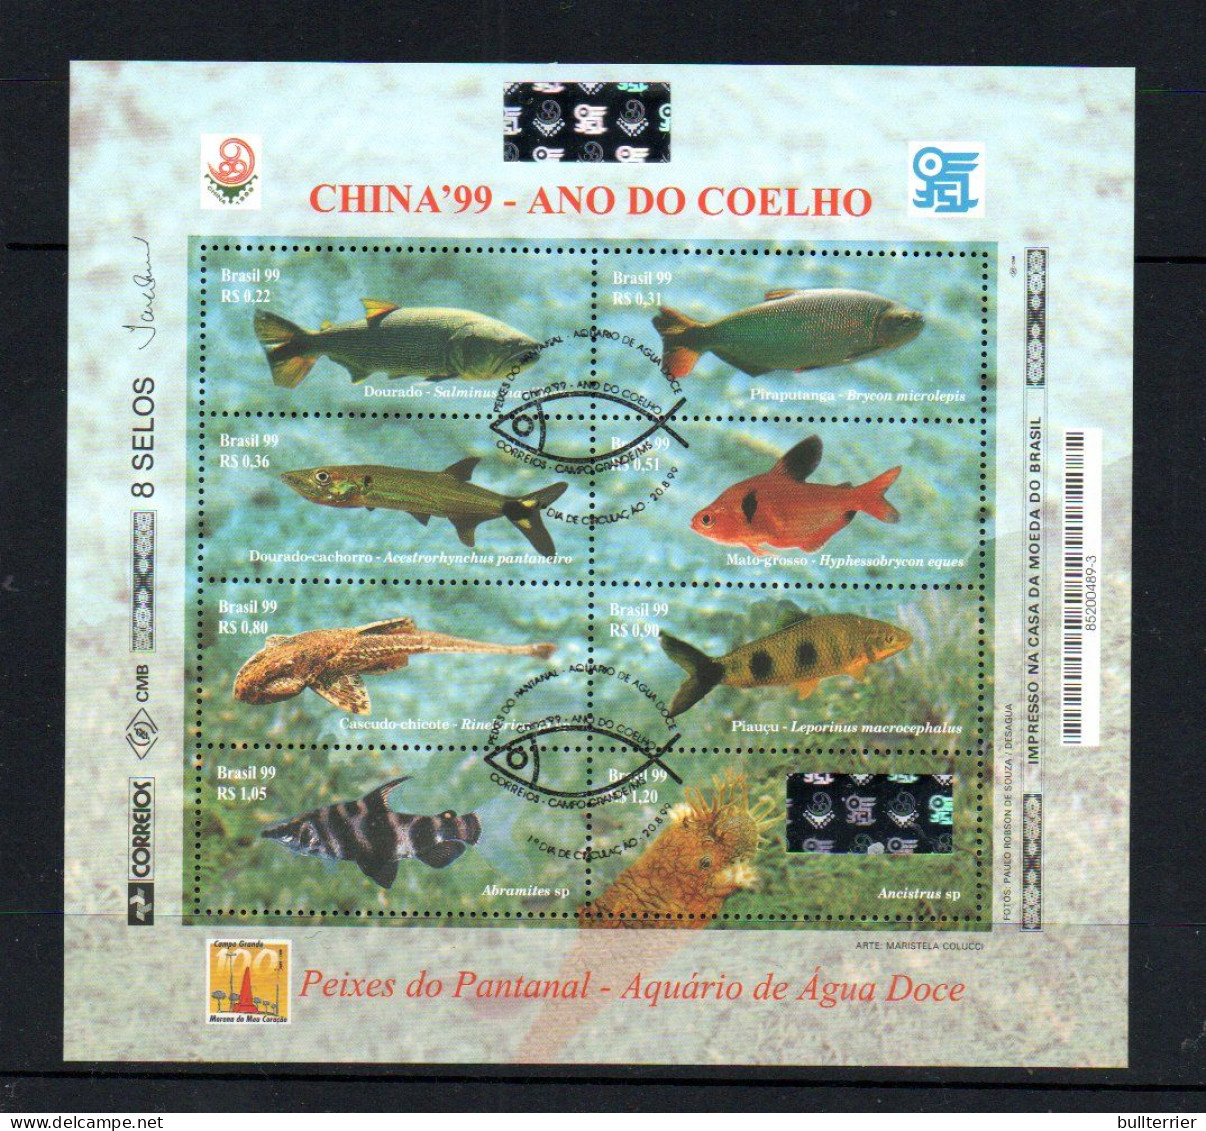 HOLOGRAMS - BRAZIL - 1999- CHINA EXPO FISHES SHEETLET OF 8 FINE USED - Hologramme